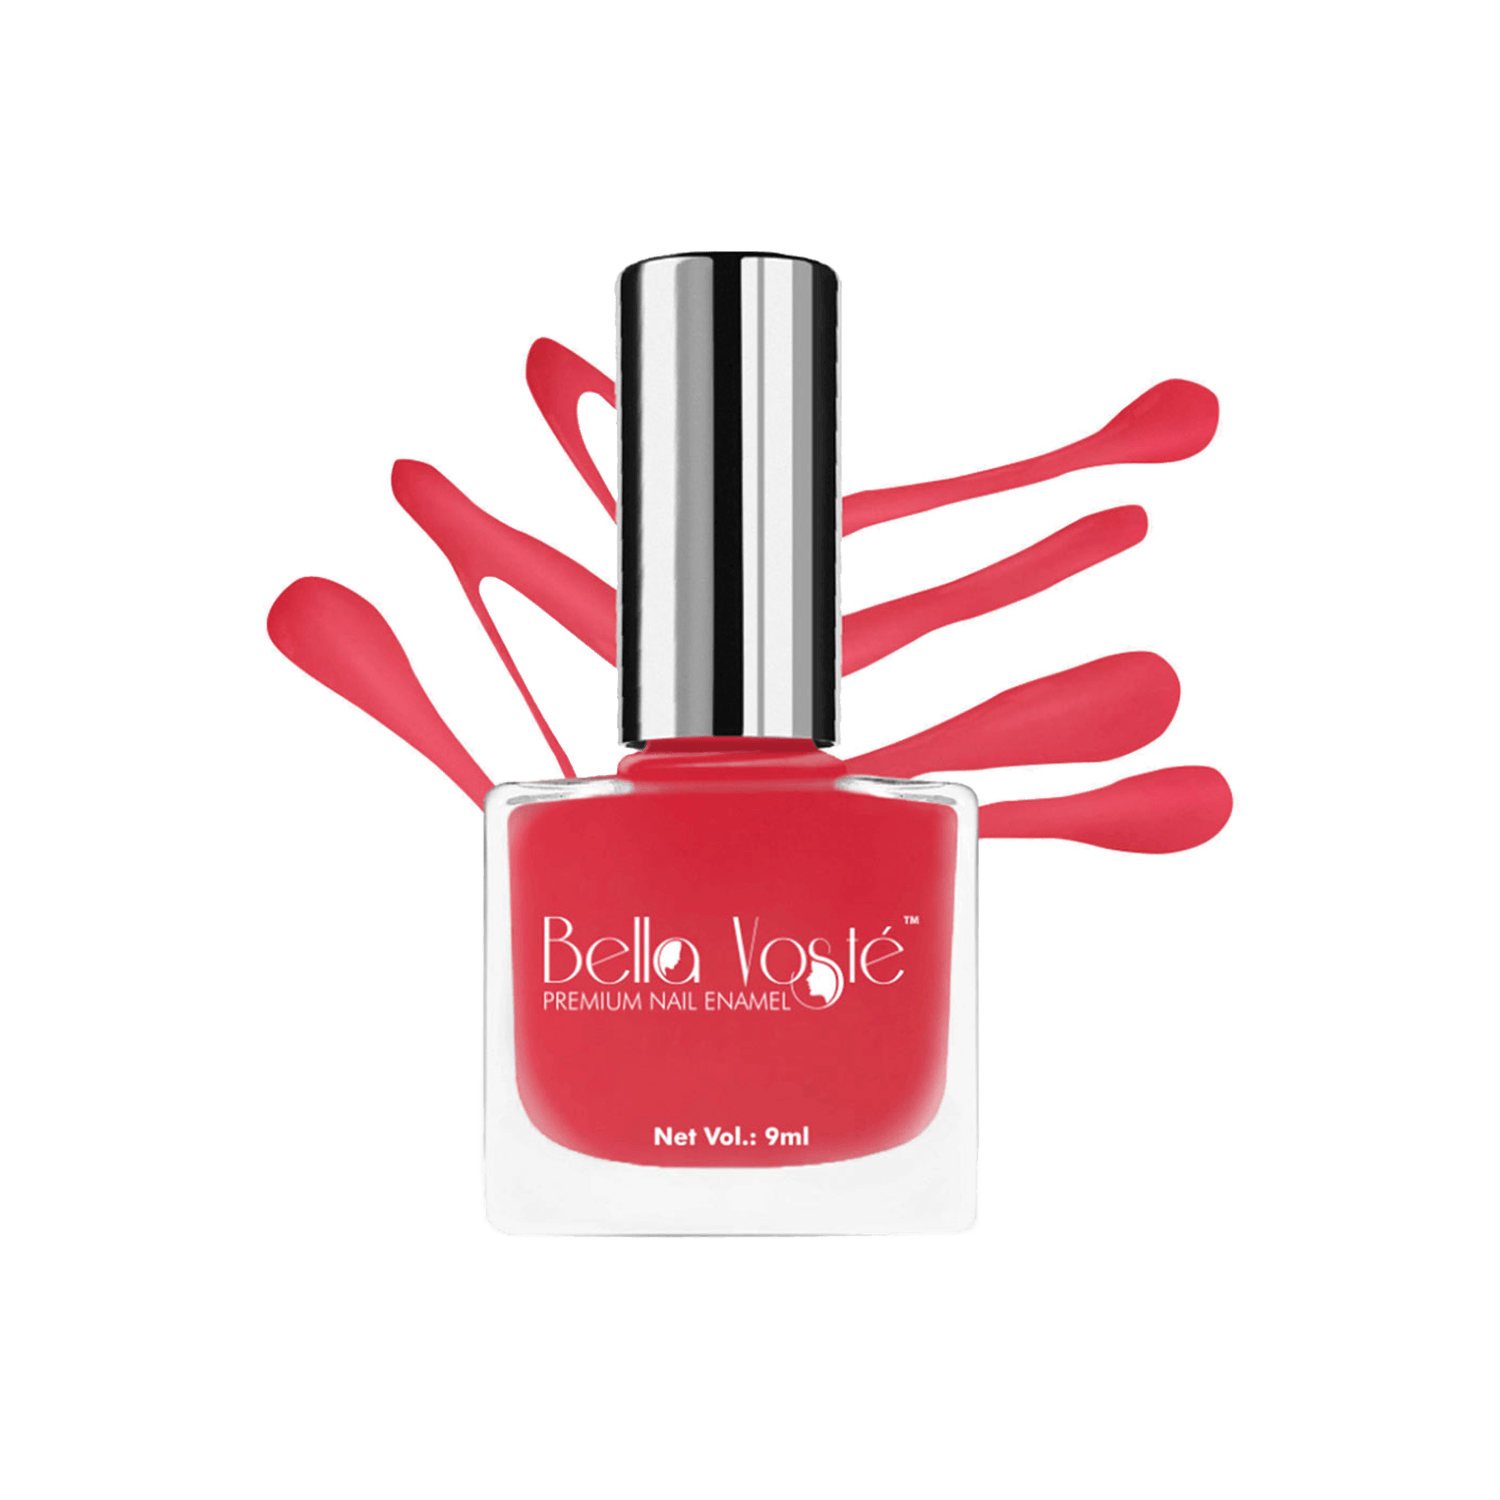 Buy BELLA VOSTE MATTE NAIL POLISH COMBO PACK OF 5 Online at Low Prices in  India - Amazon.in